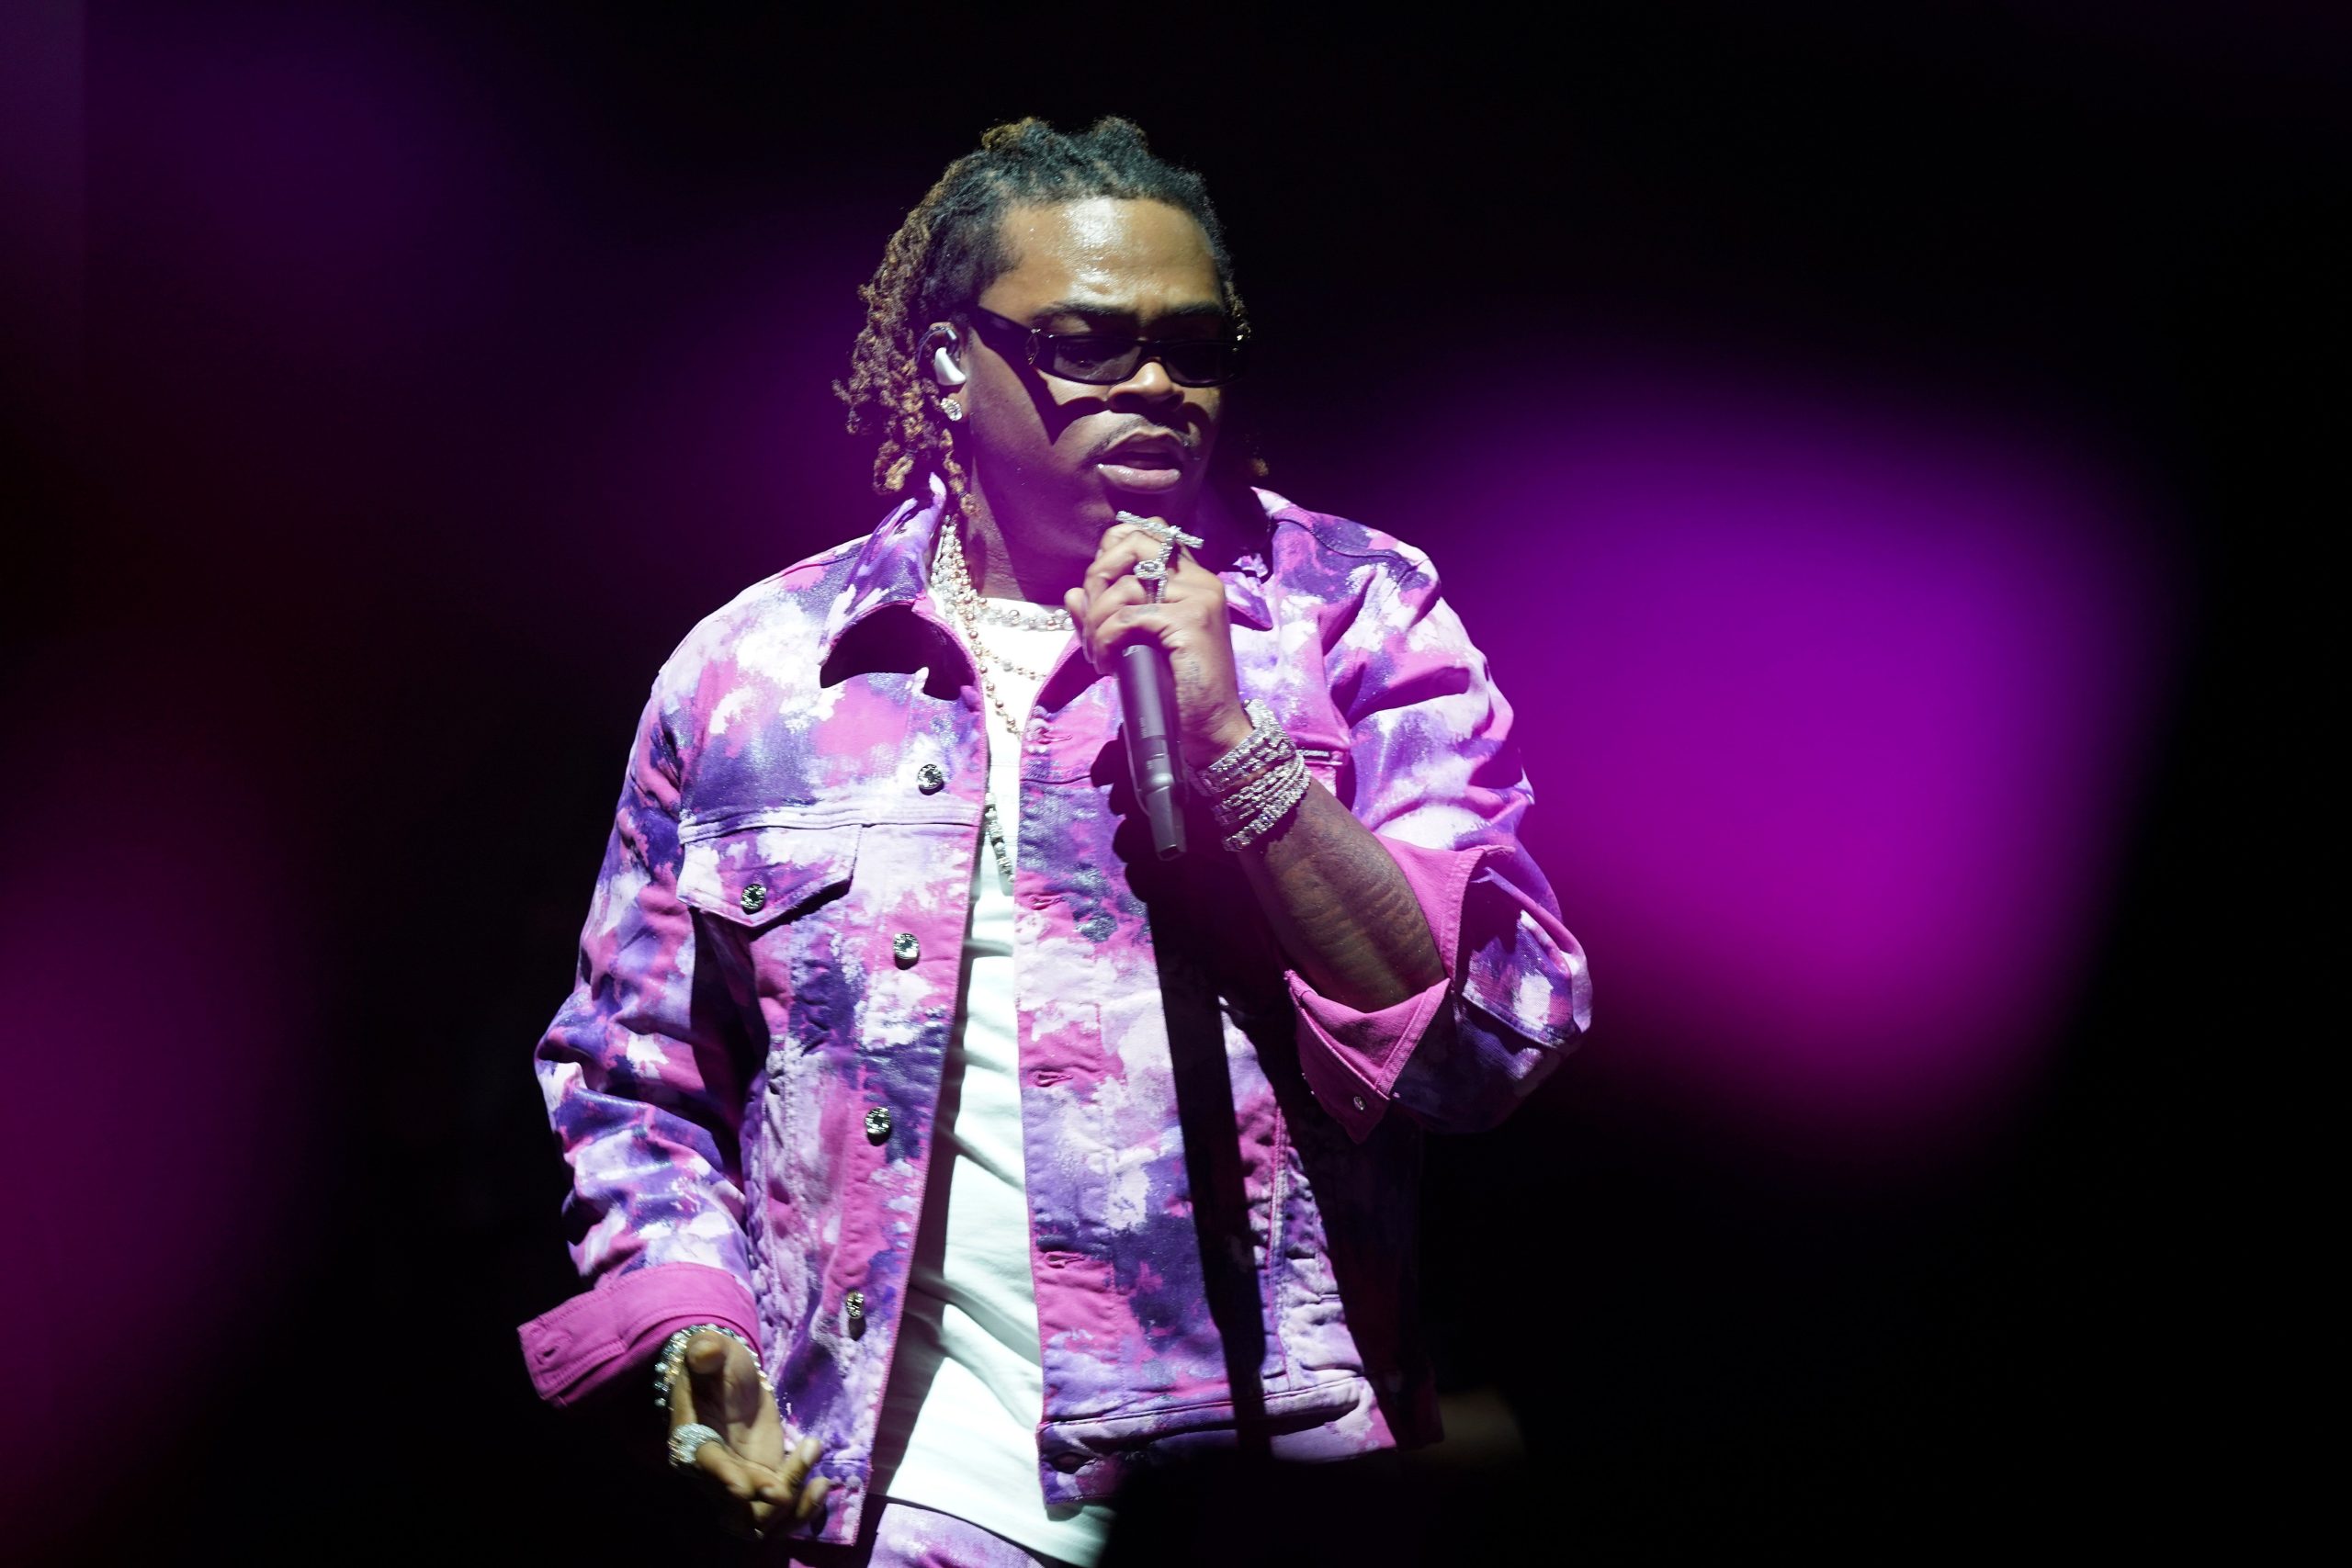 gunna-fires-back-at-those-who-said-he-“told”-on-young-thug-in-new-song-“bread-&-butter”